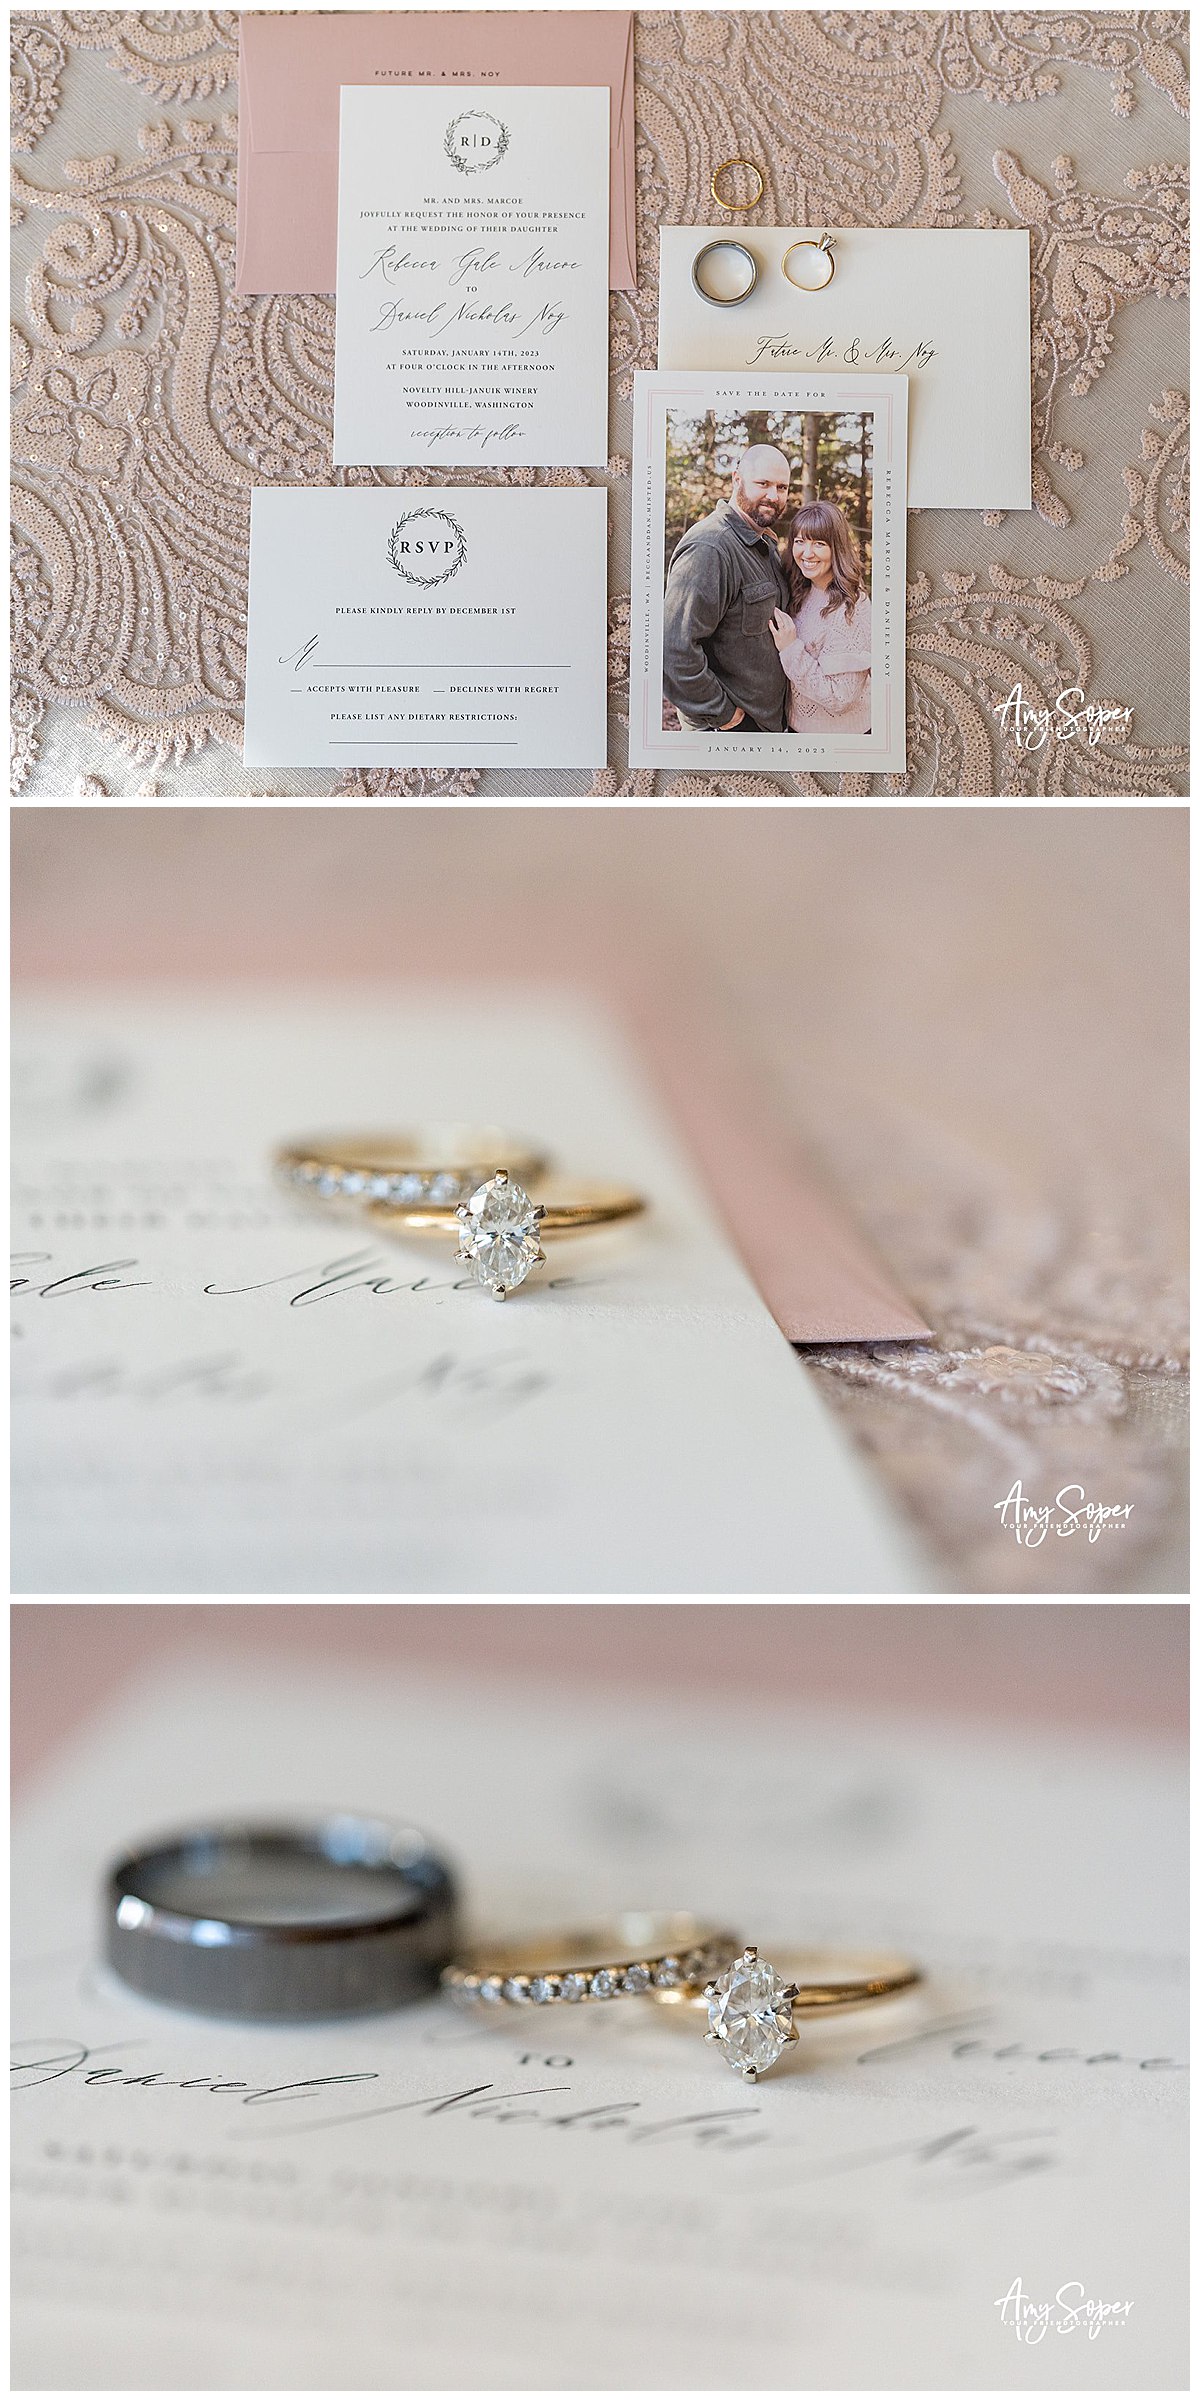 wedding rings and invitation 